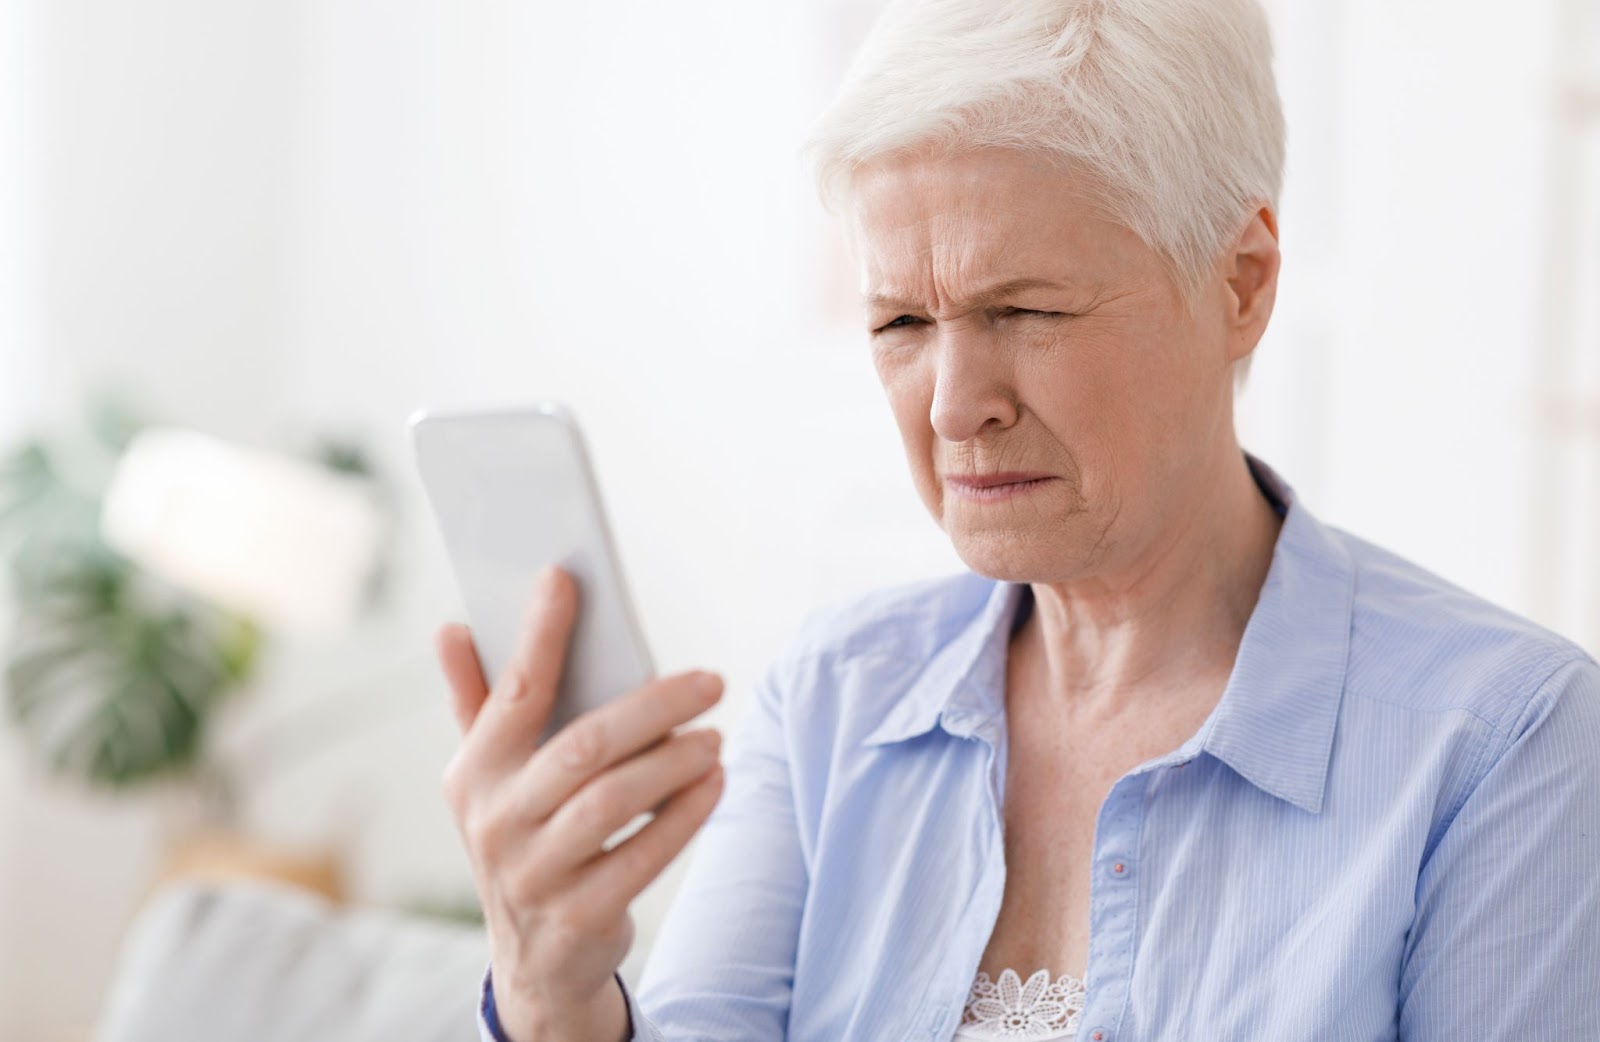 An elderly women squints her eyes as she struggles to see something on her phone.